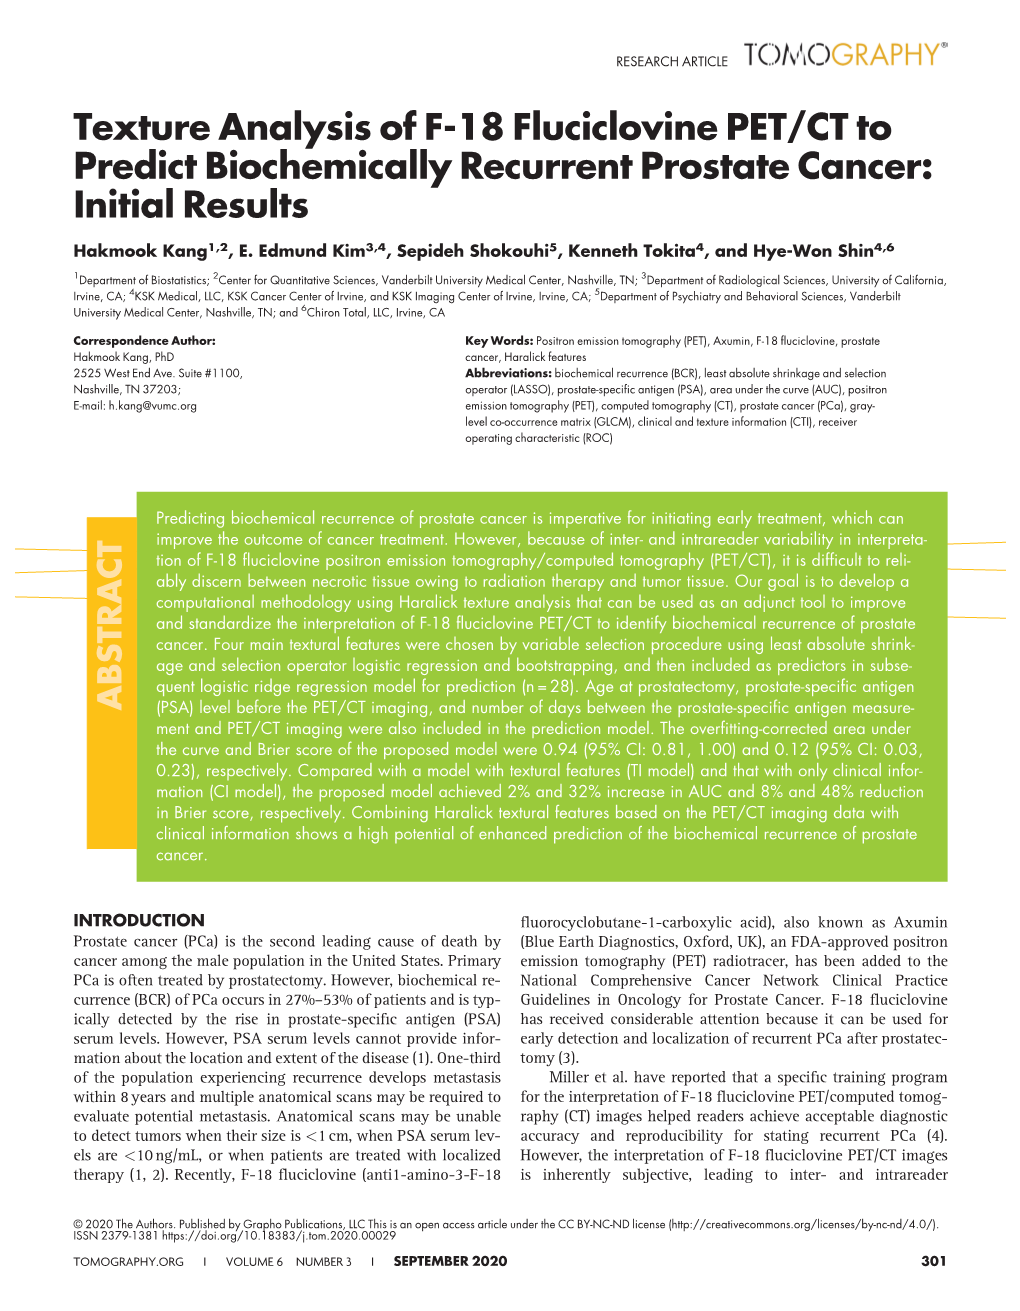 Texture Analysis of F-18 Fluciclovine PET/CT to Predict Biochemically Recurrent Prostate Cancer: Initial Results